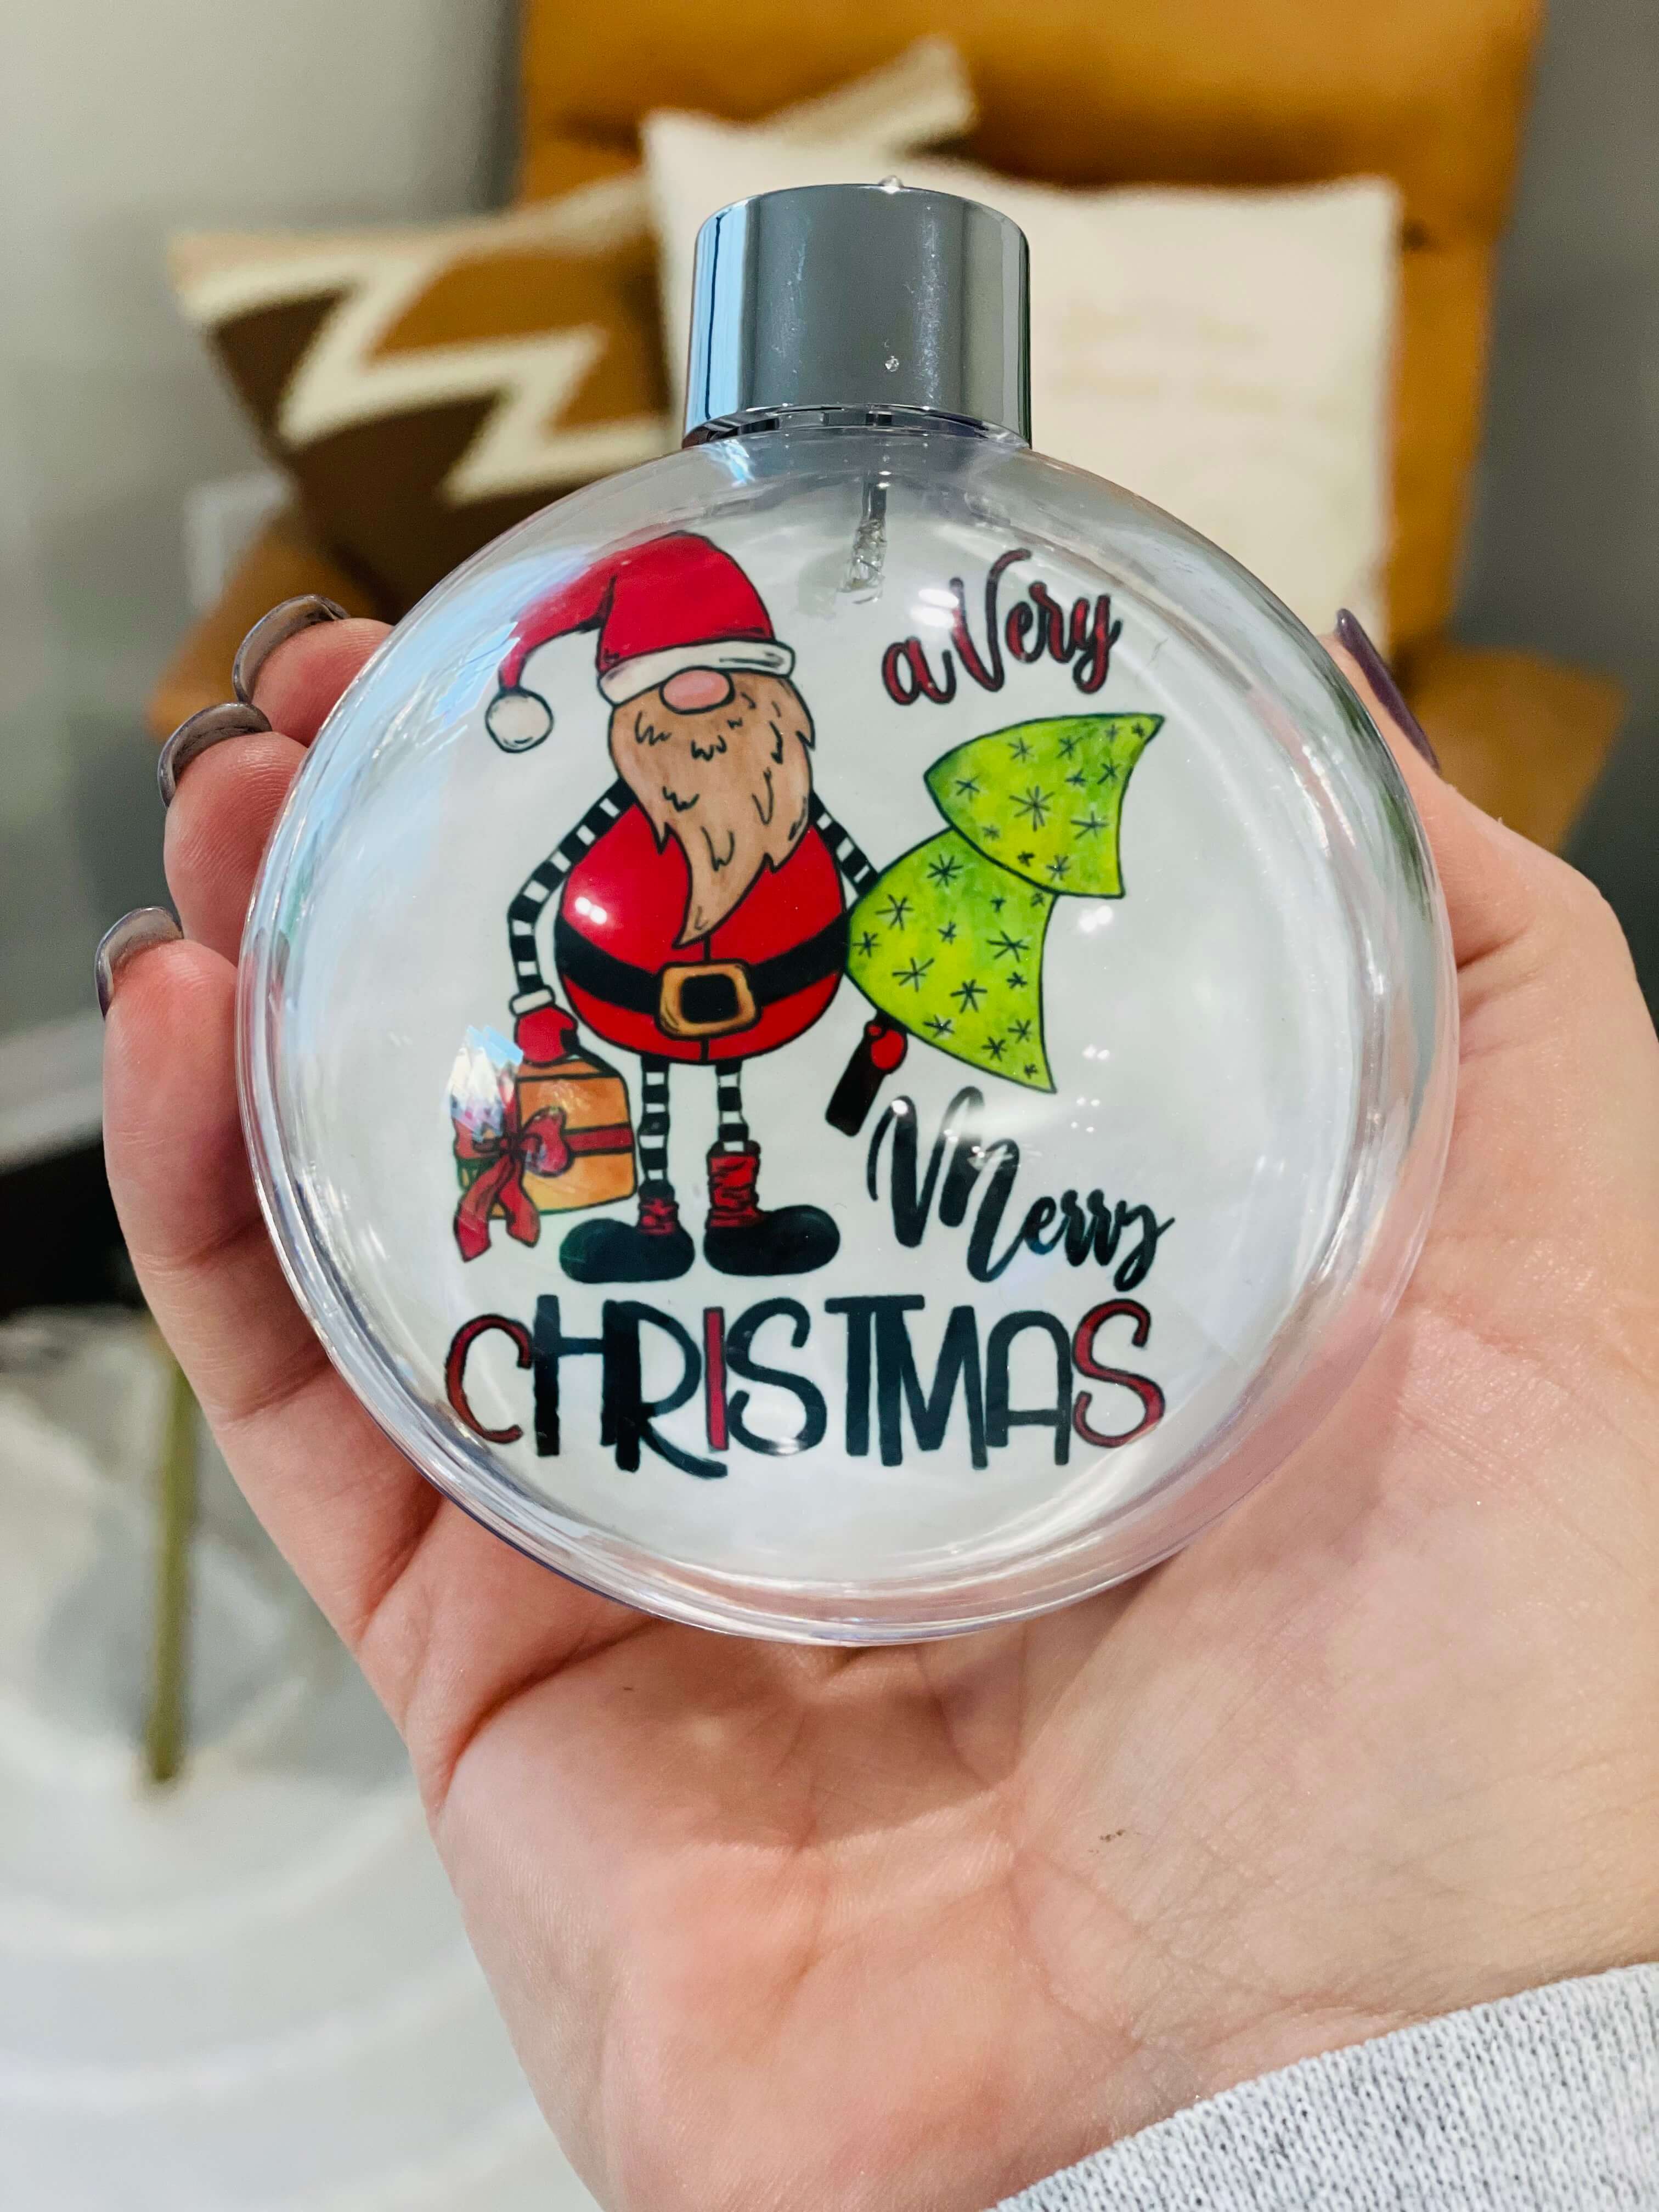 Hanging ball ornament with "Merry Christmas" under a santa holding a tree